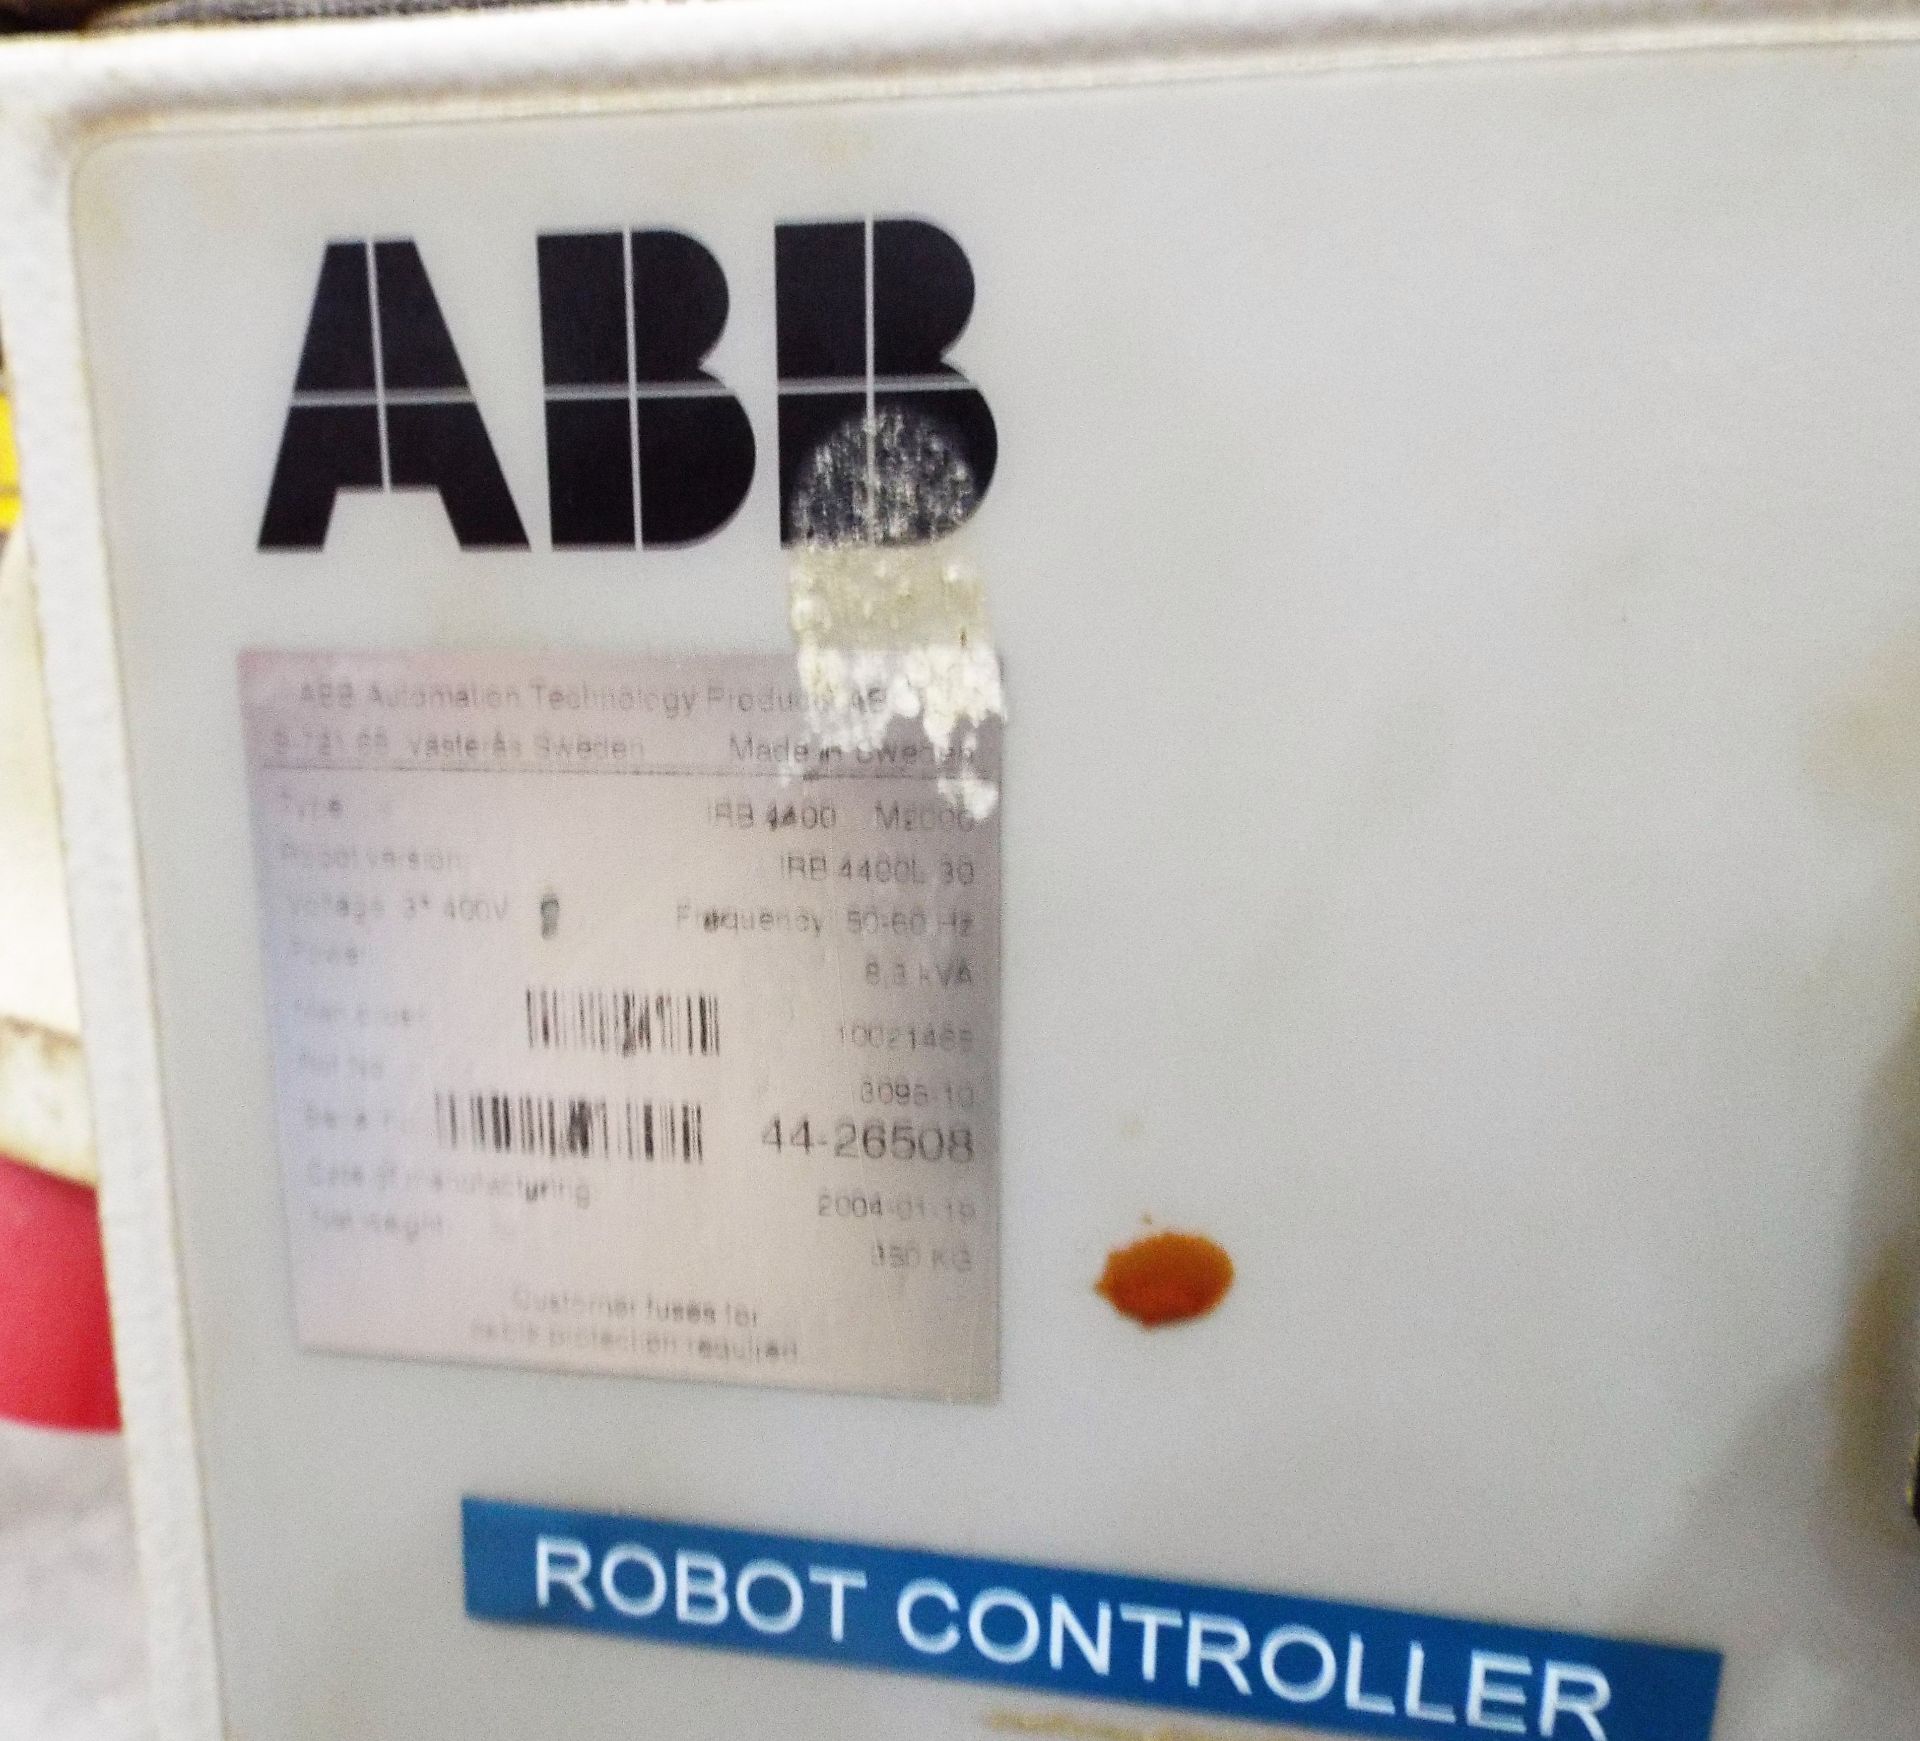 ABB-IRB 4400 - M2000 6 Axis Industrial Robot. - Image 9 of 15